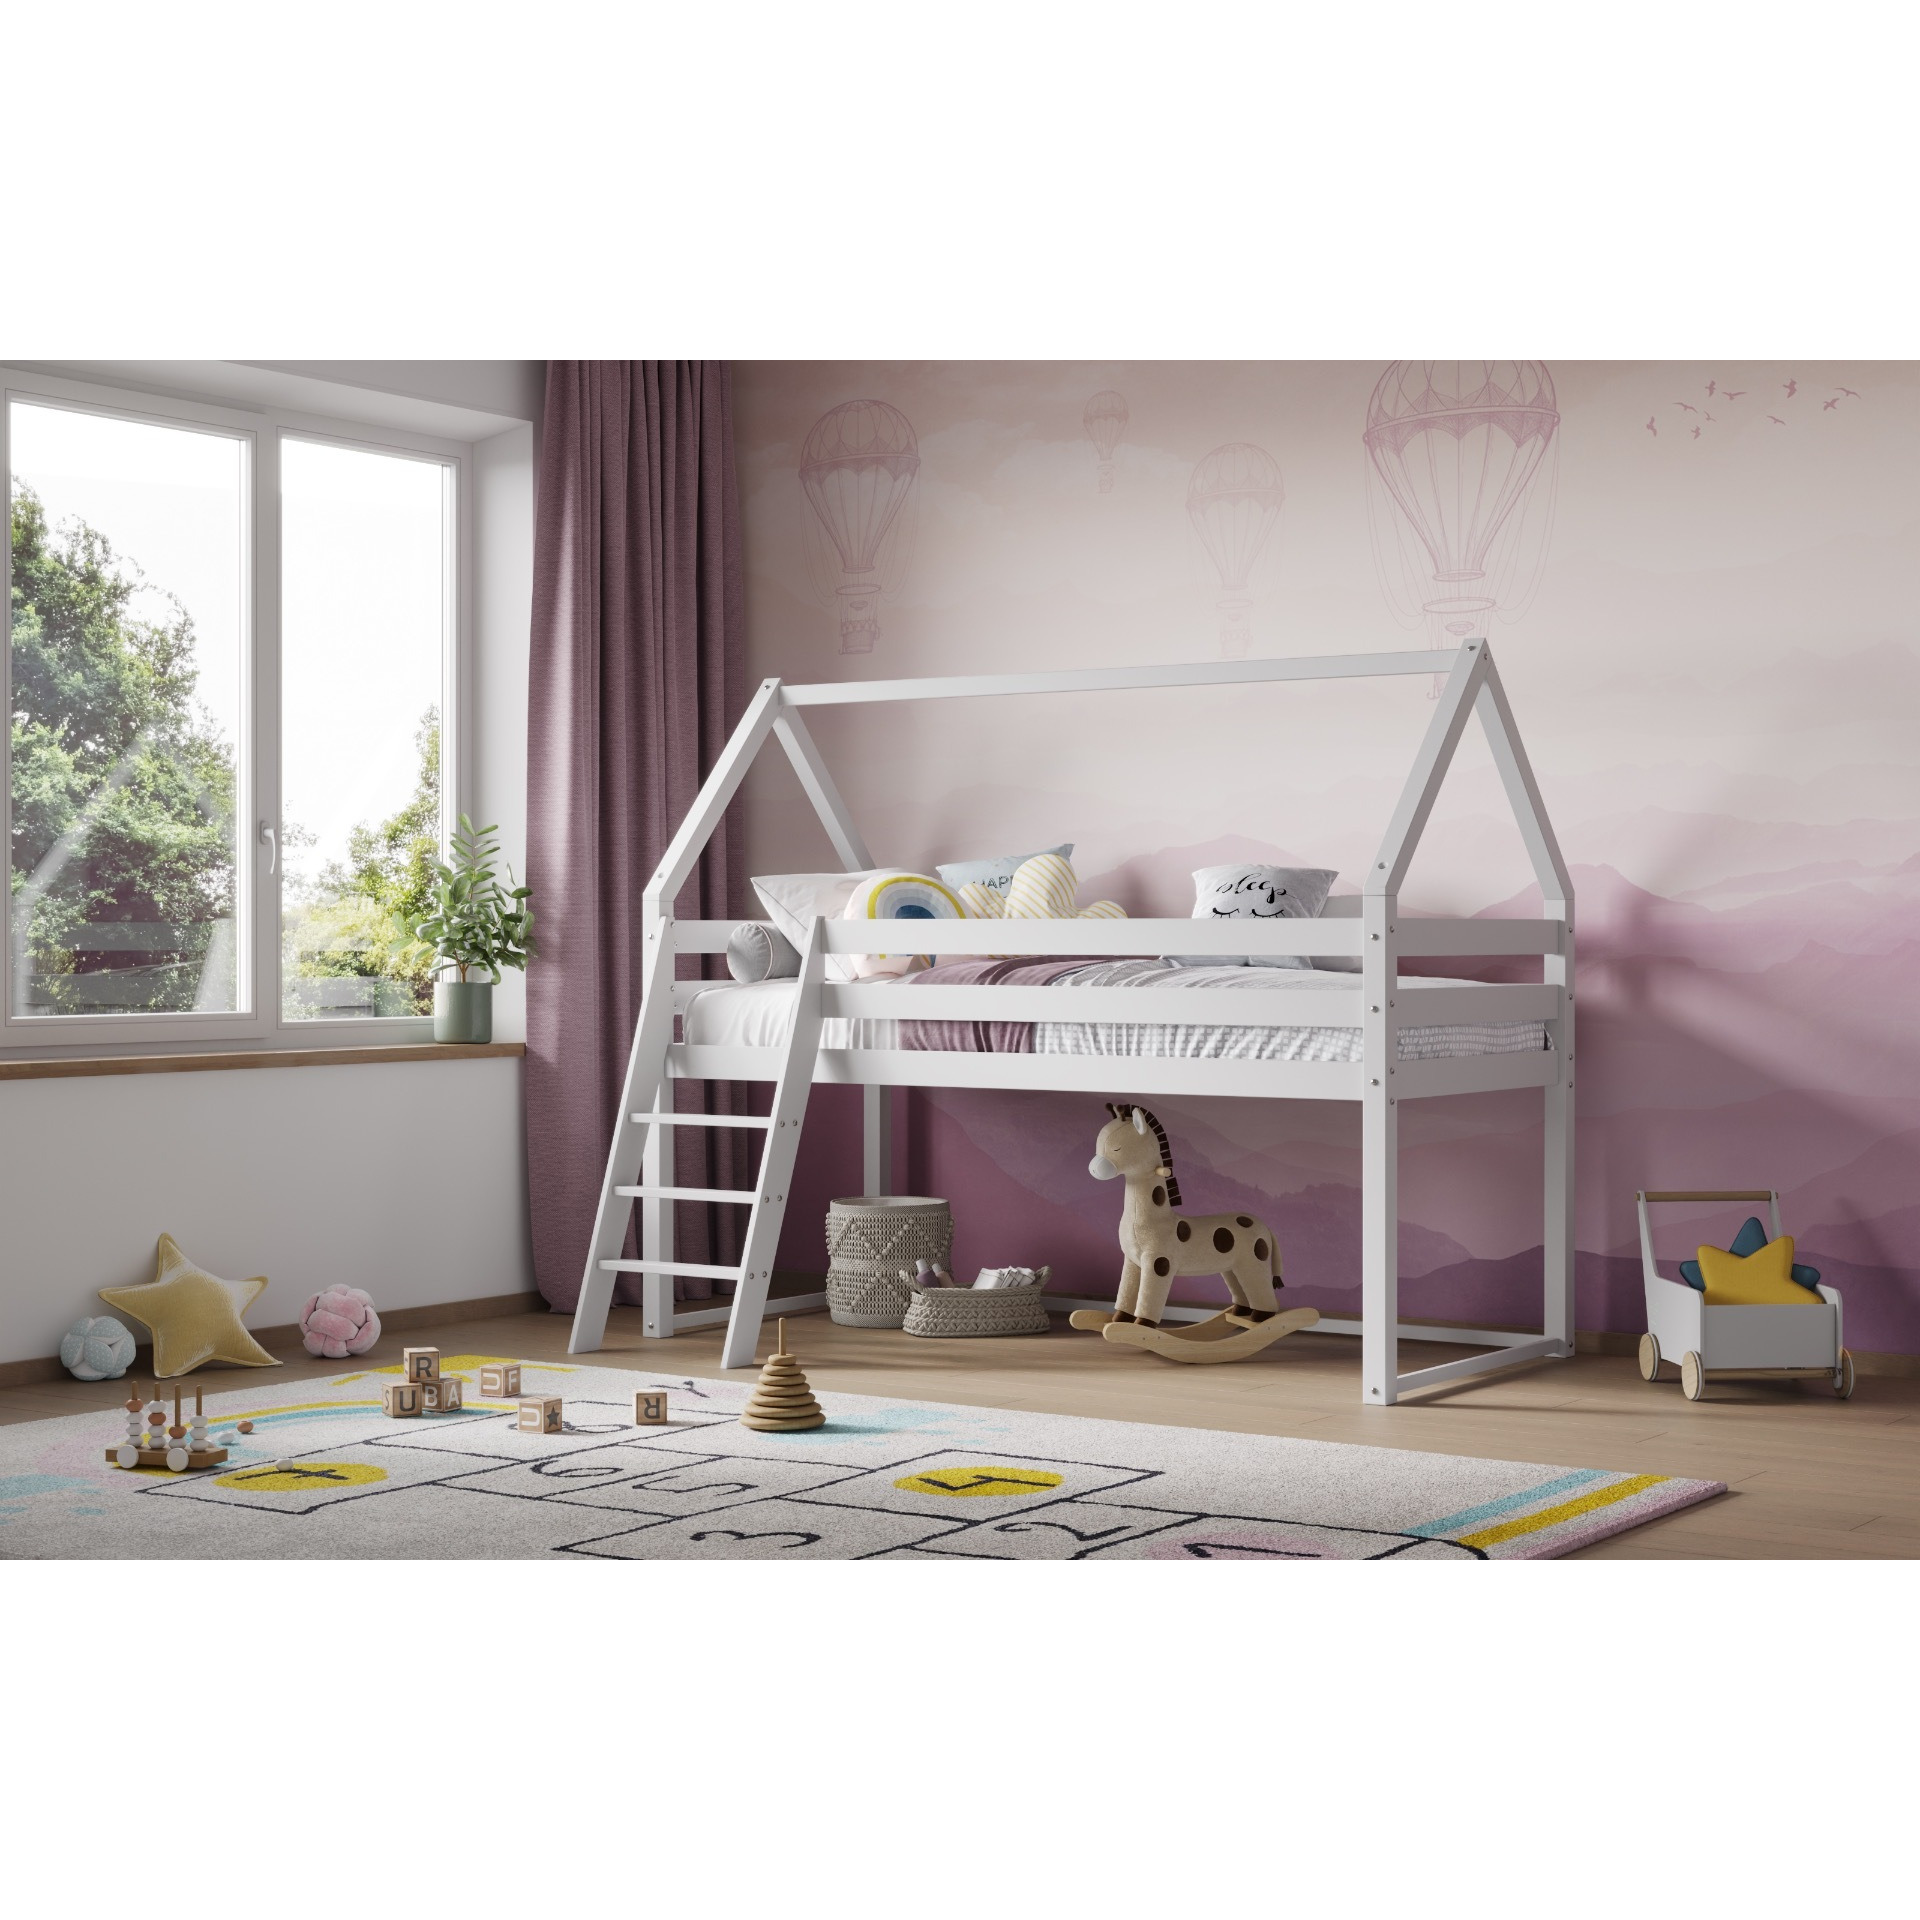 Flair Ellie House Midsleeper Wooden Bed in White - image 1